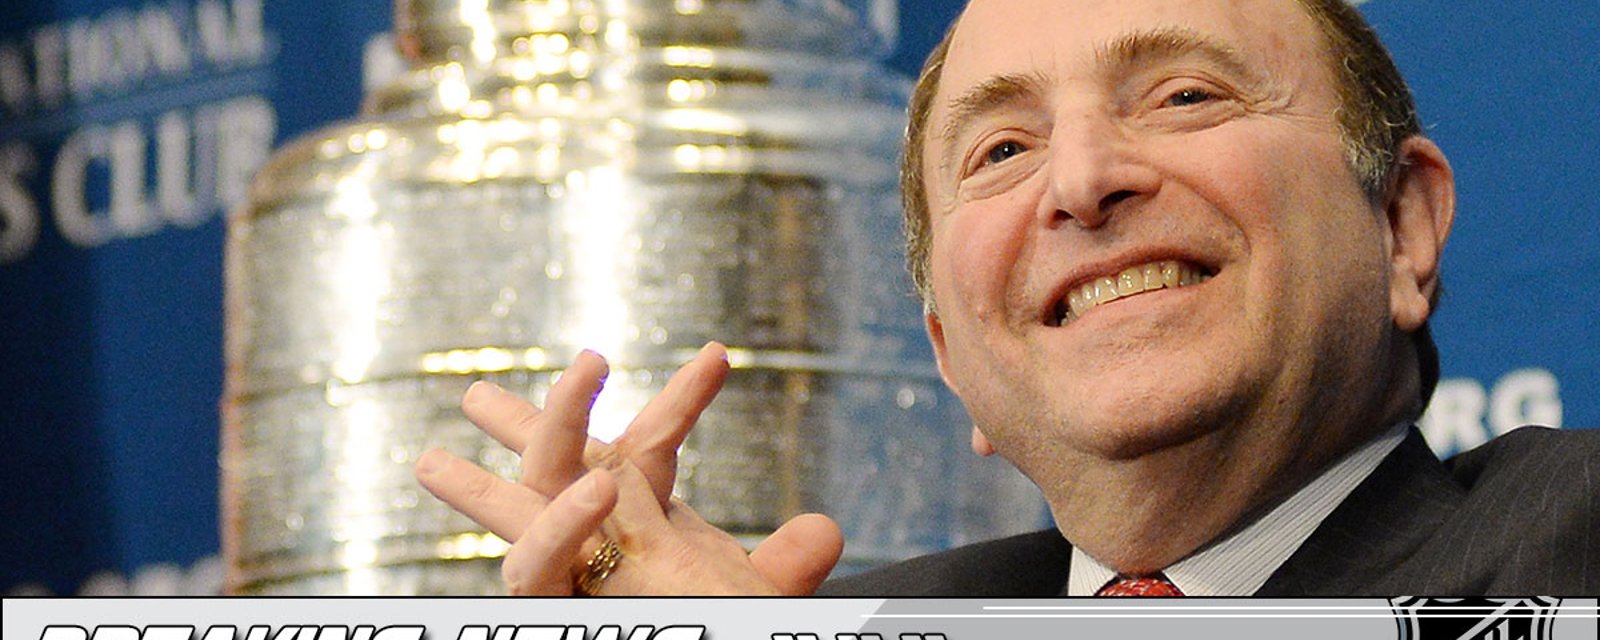 Breaking: Top official slams Bettman over Olympic decision